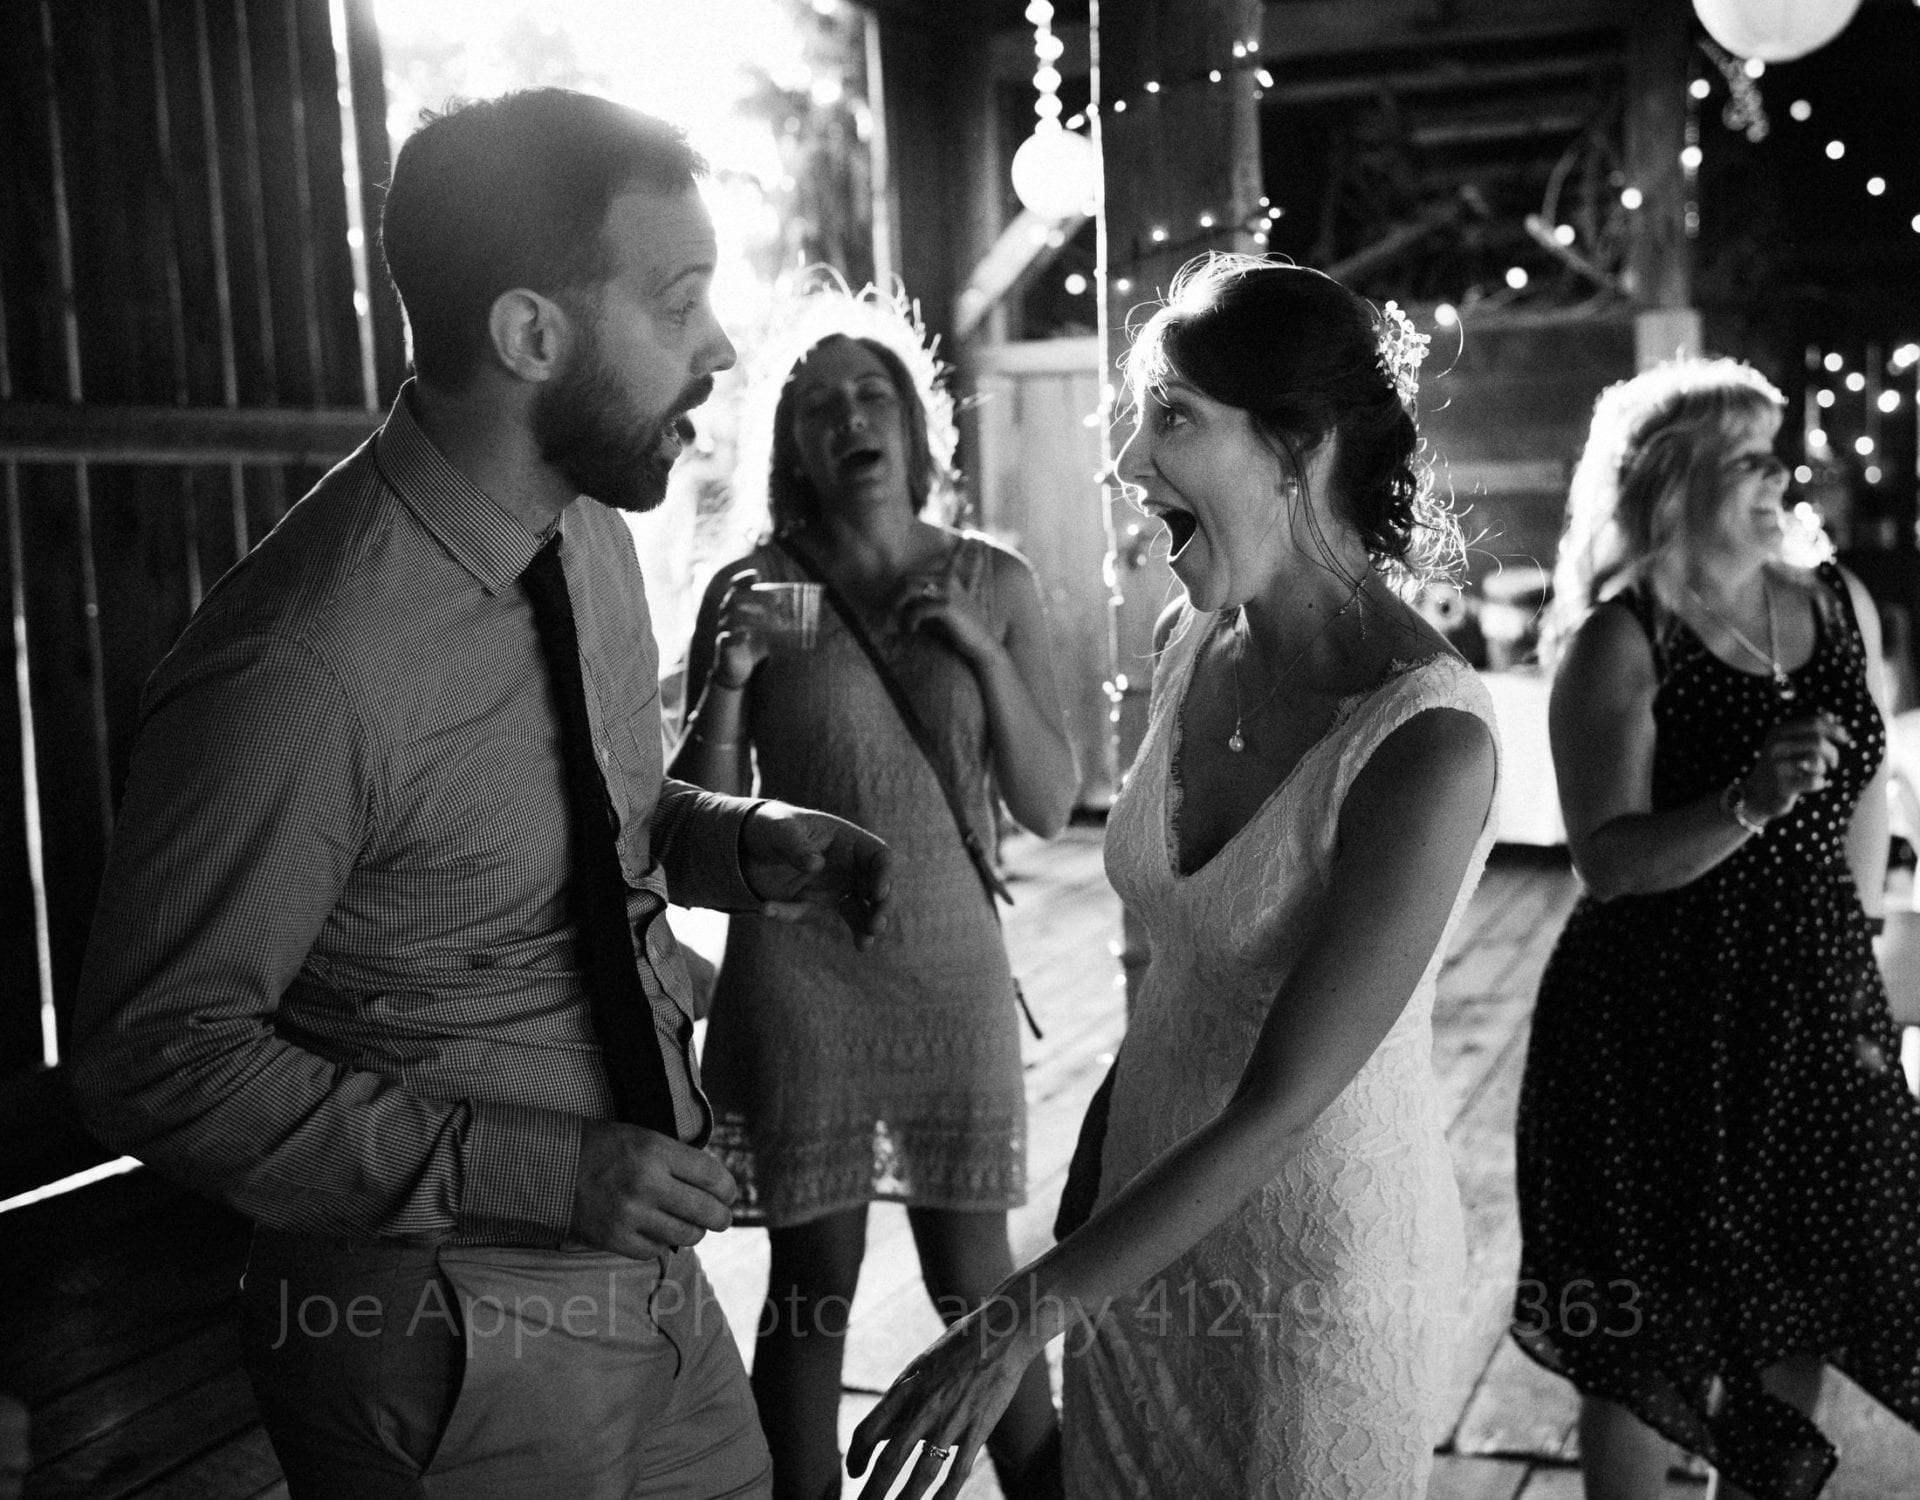 Bride and groom dance together in a barn as sun streams through the open door.